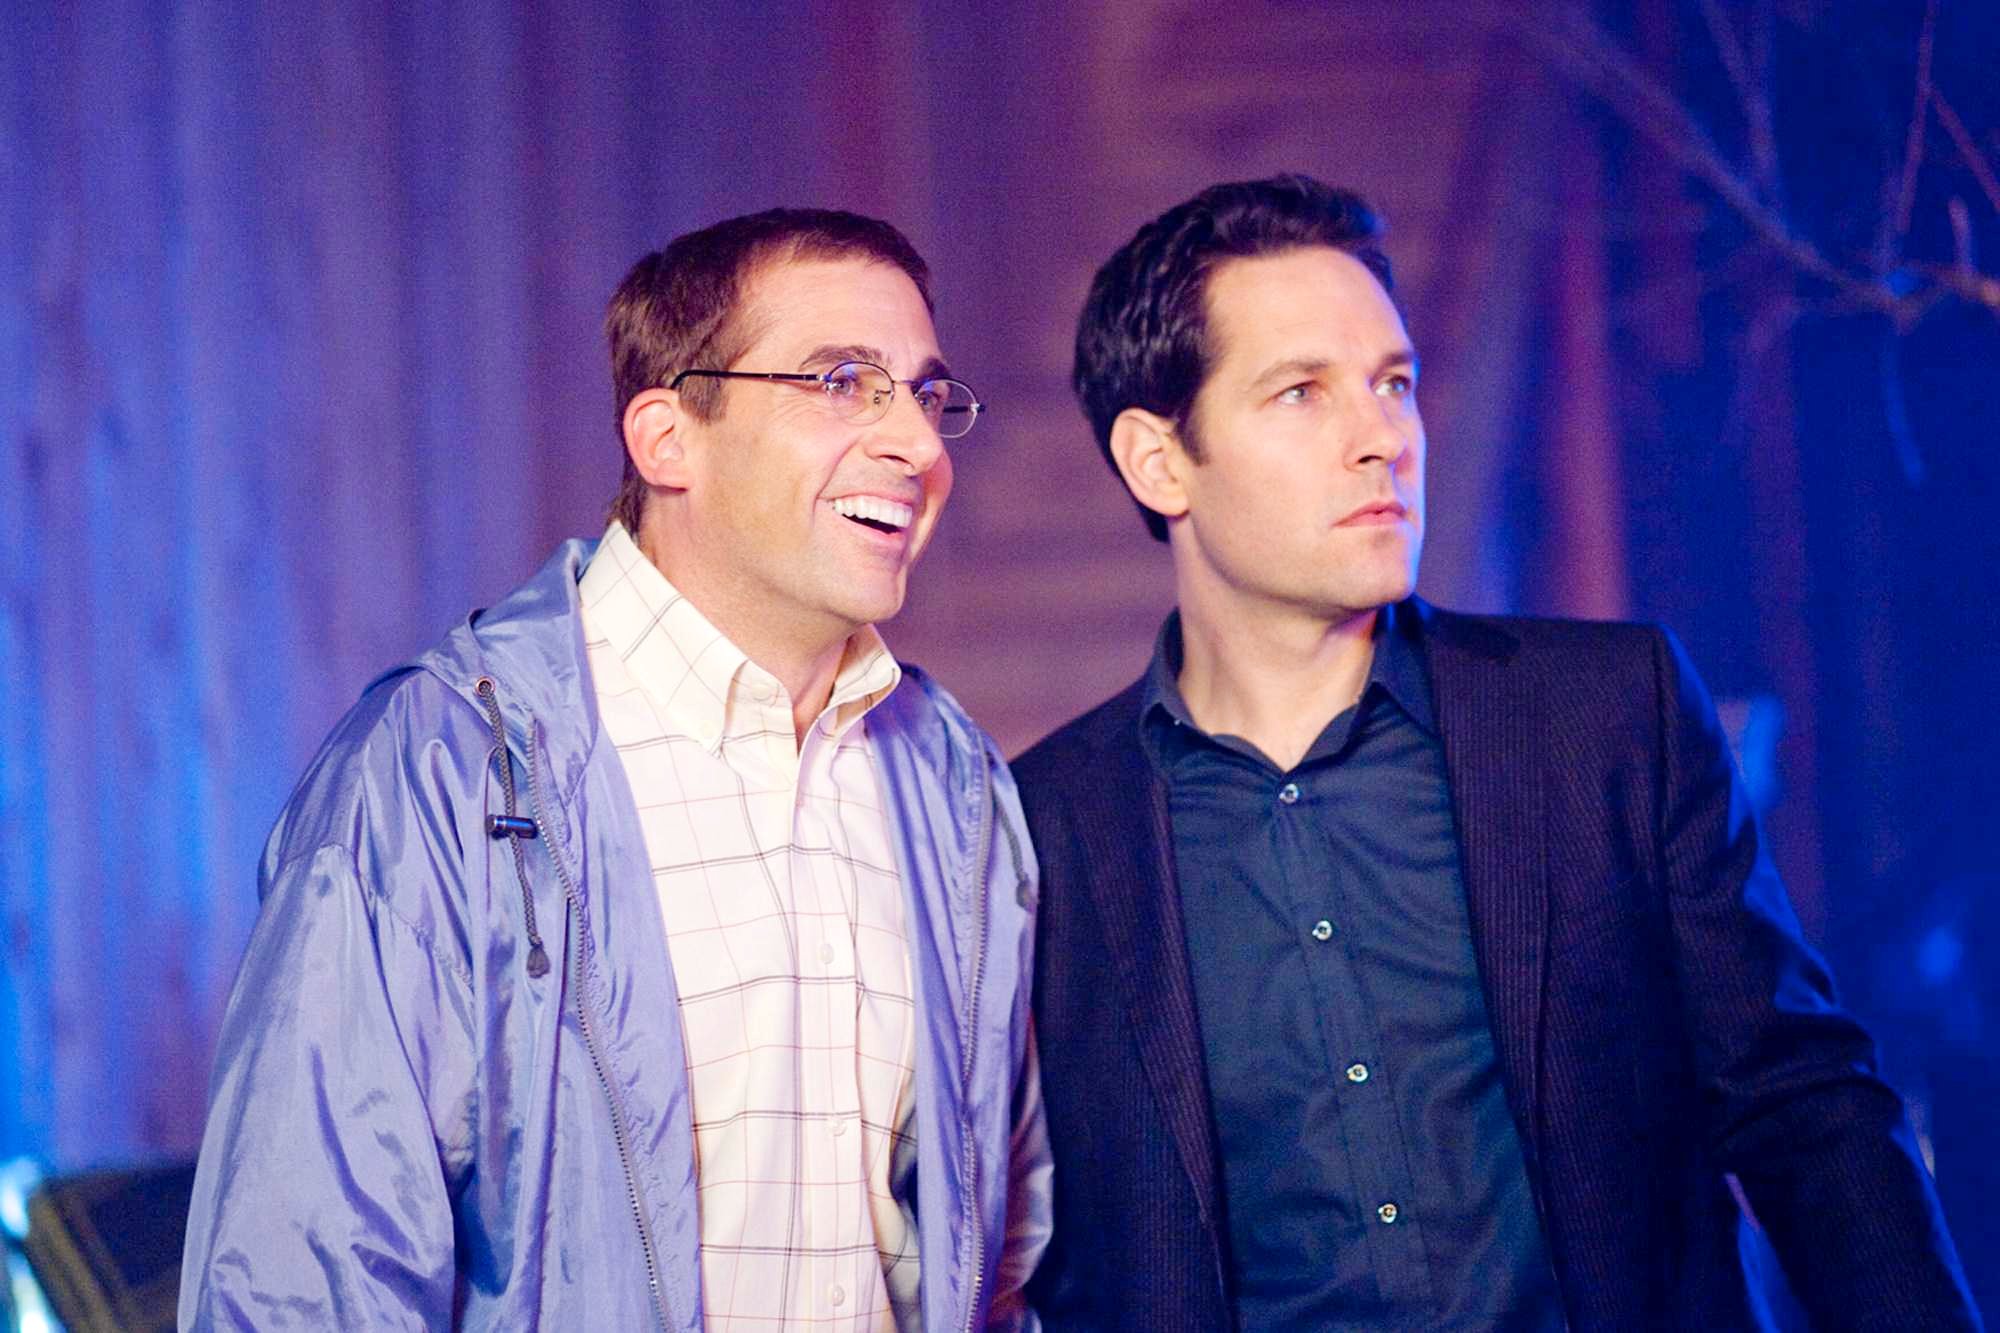 Steve Carell stars as Barry and Paul Rudd stars as Tim Conrad in Paramount Pictures' Dinner for Schmucks (2010). Photo by Merie Weismiller Wallace